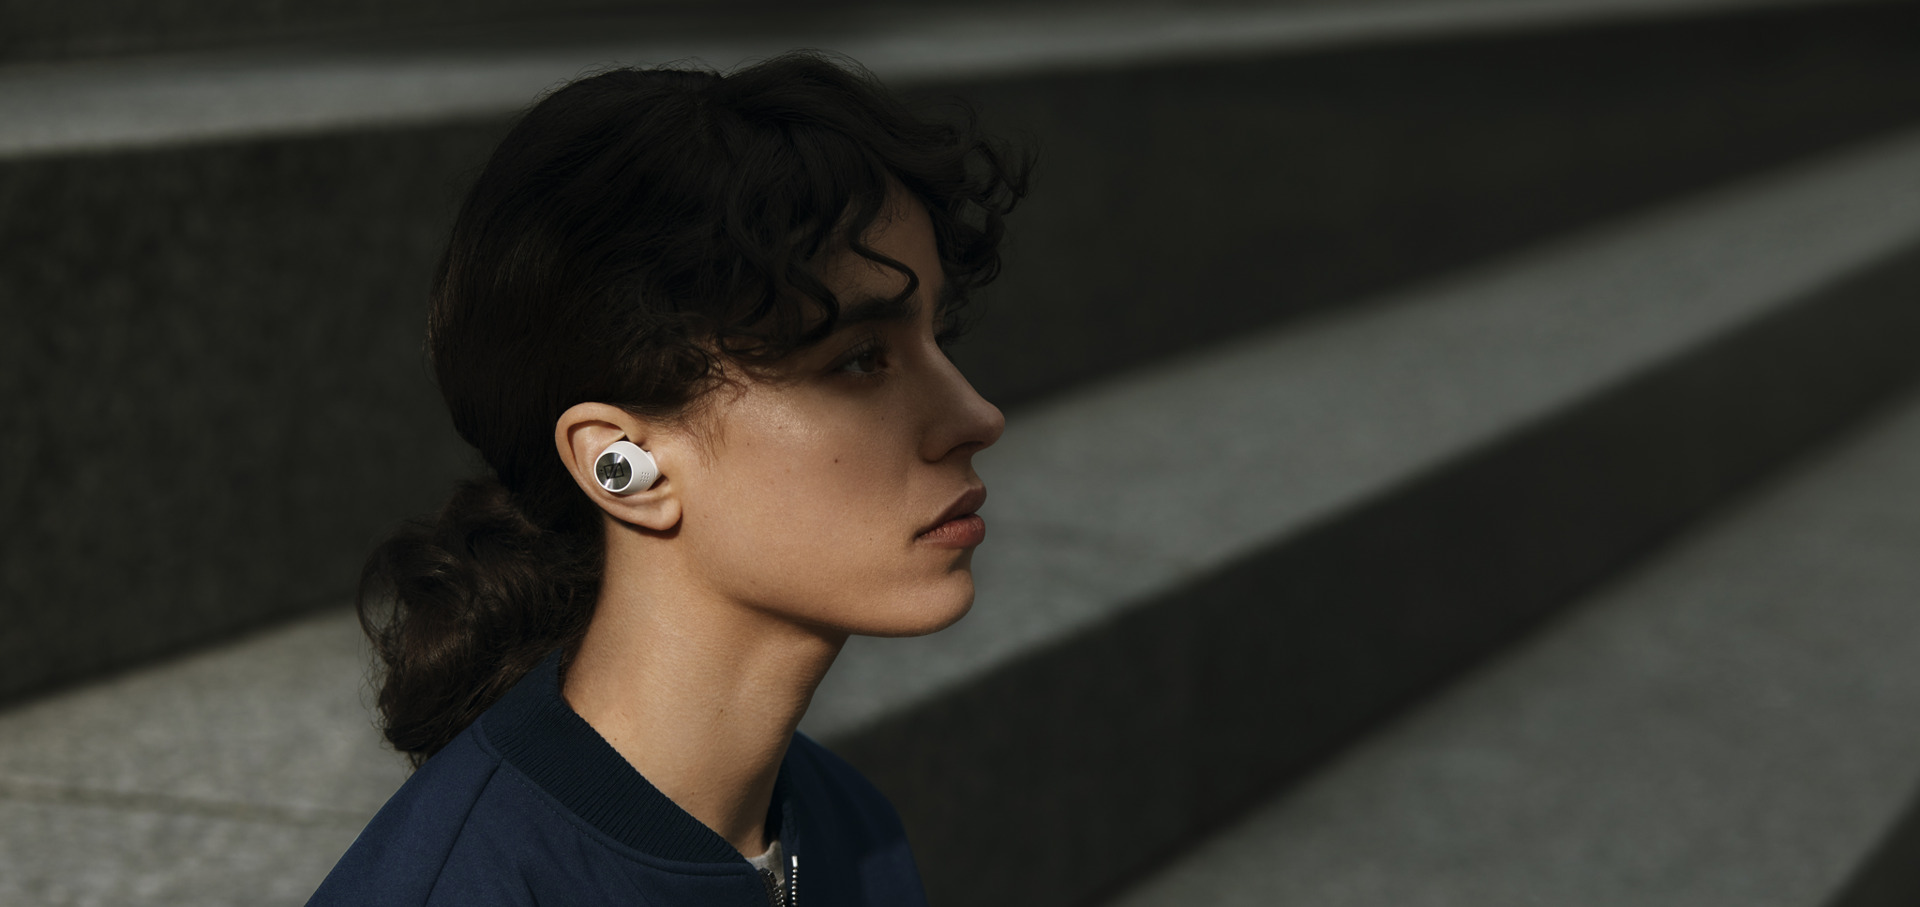 Earbuds that put sound first